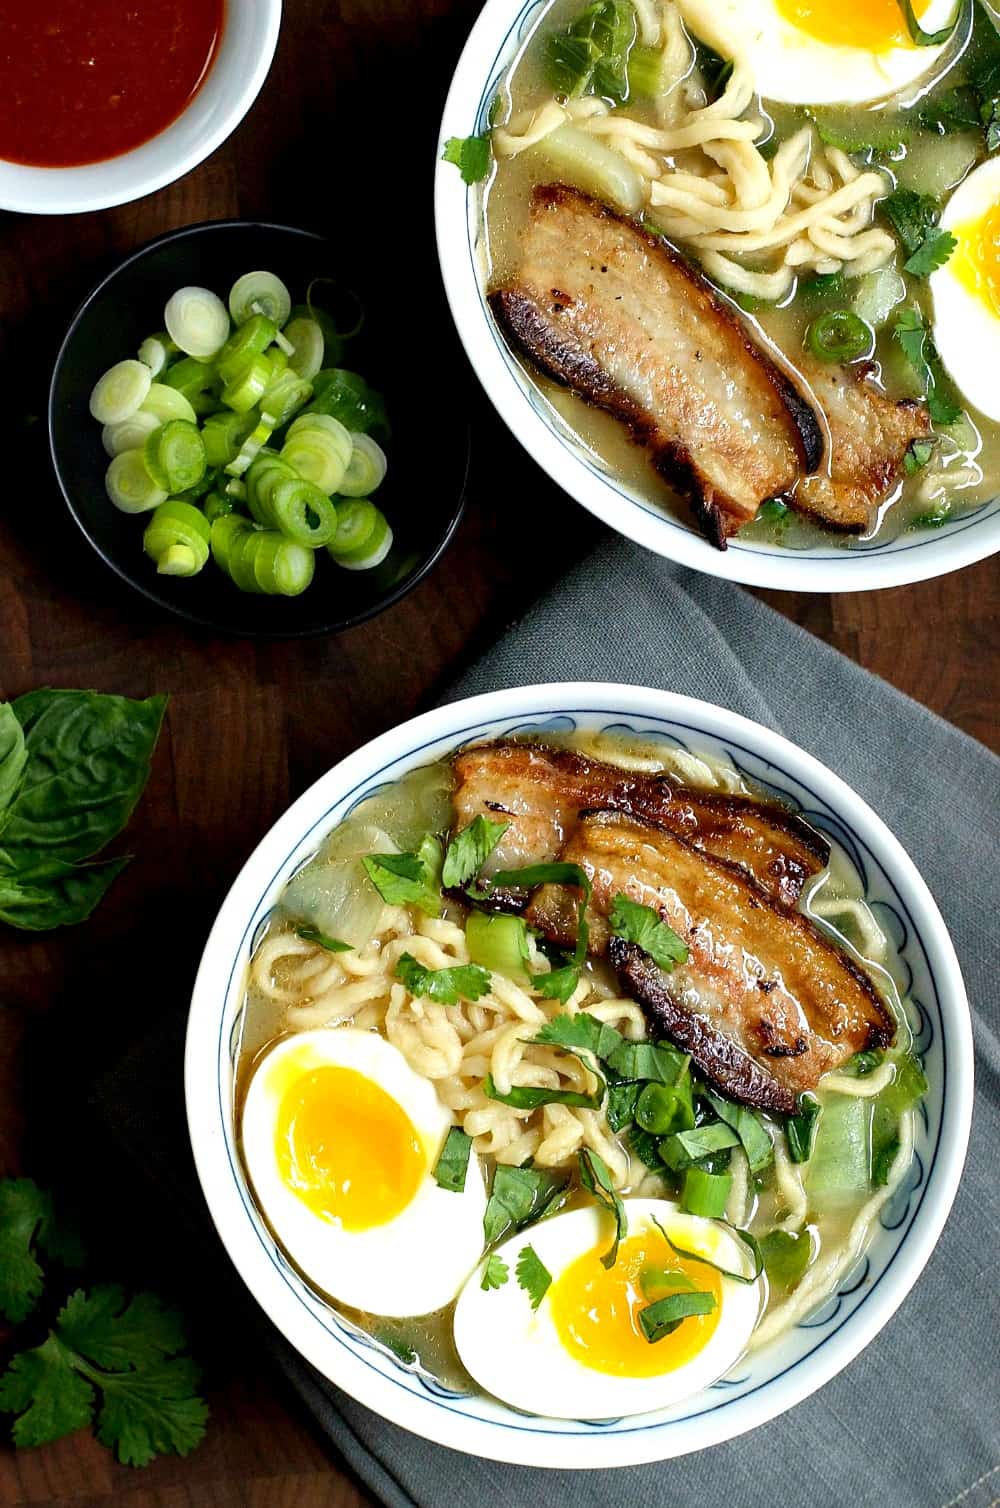 Two bowls of Asian noodle soup with pork belly and an egg on top.